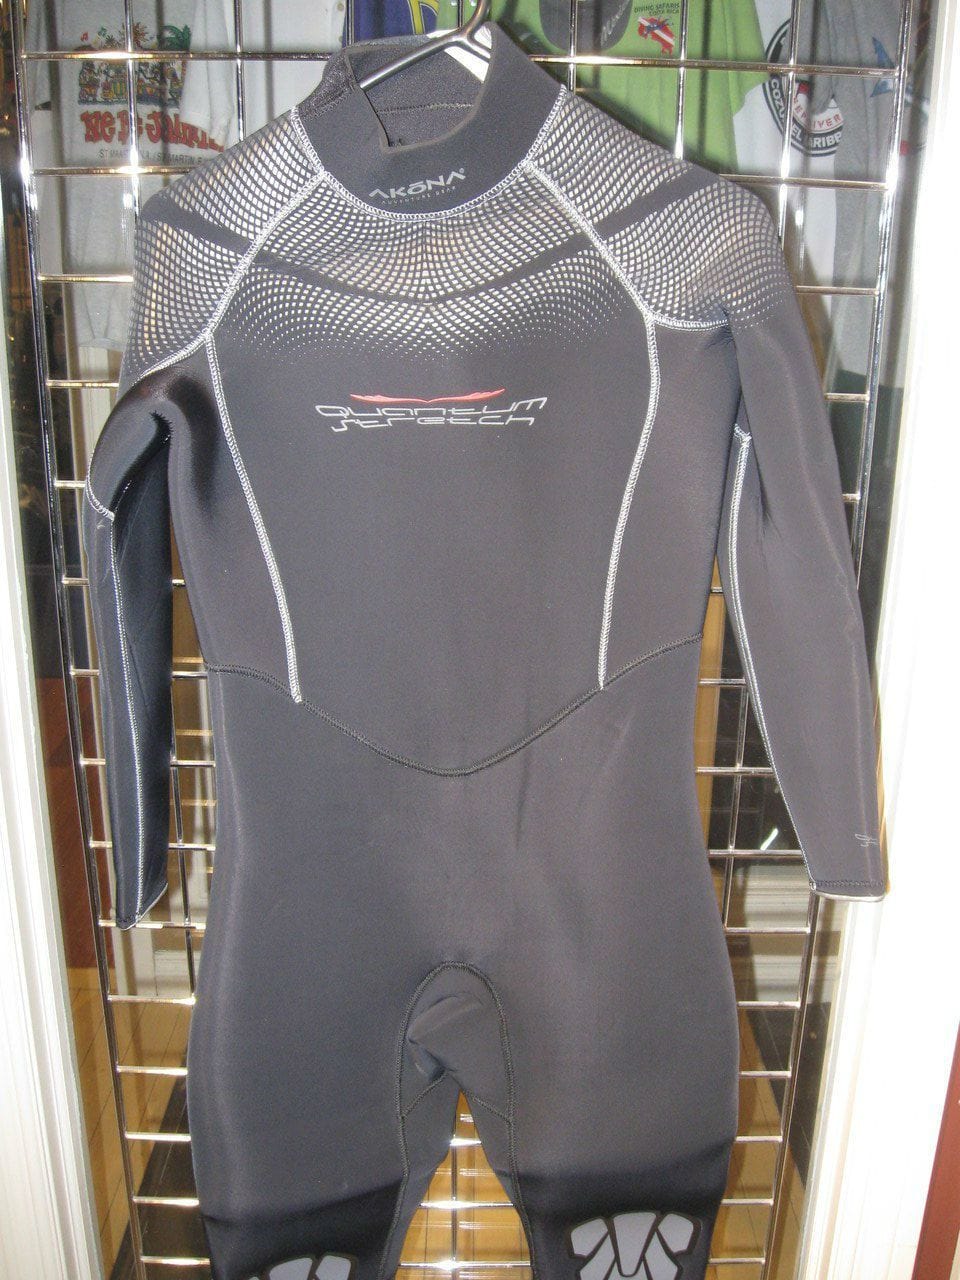 Akona 1 Piece AKMS209 3mm Mens Wetsuit (New) - Reduced!